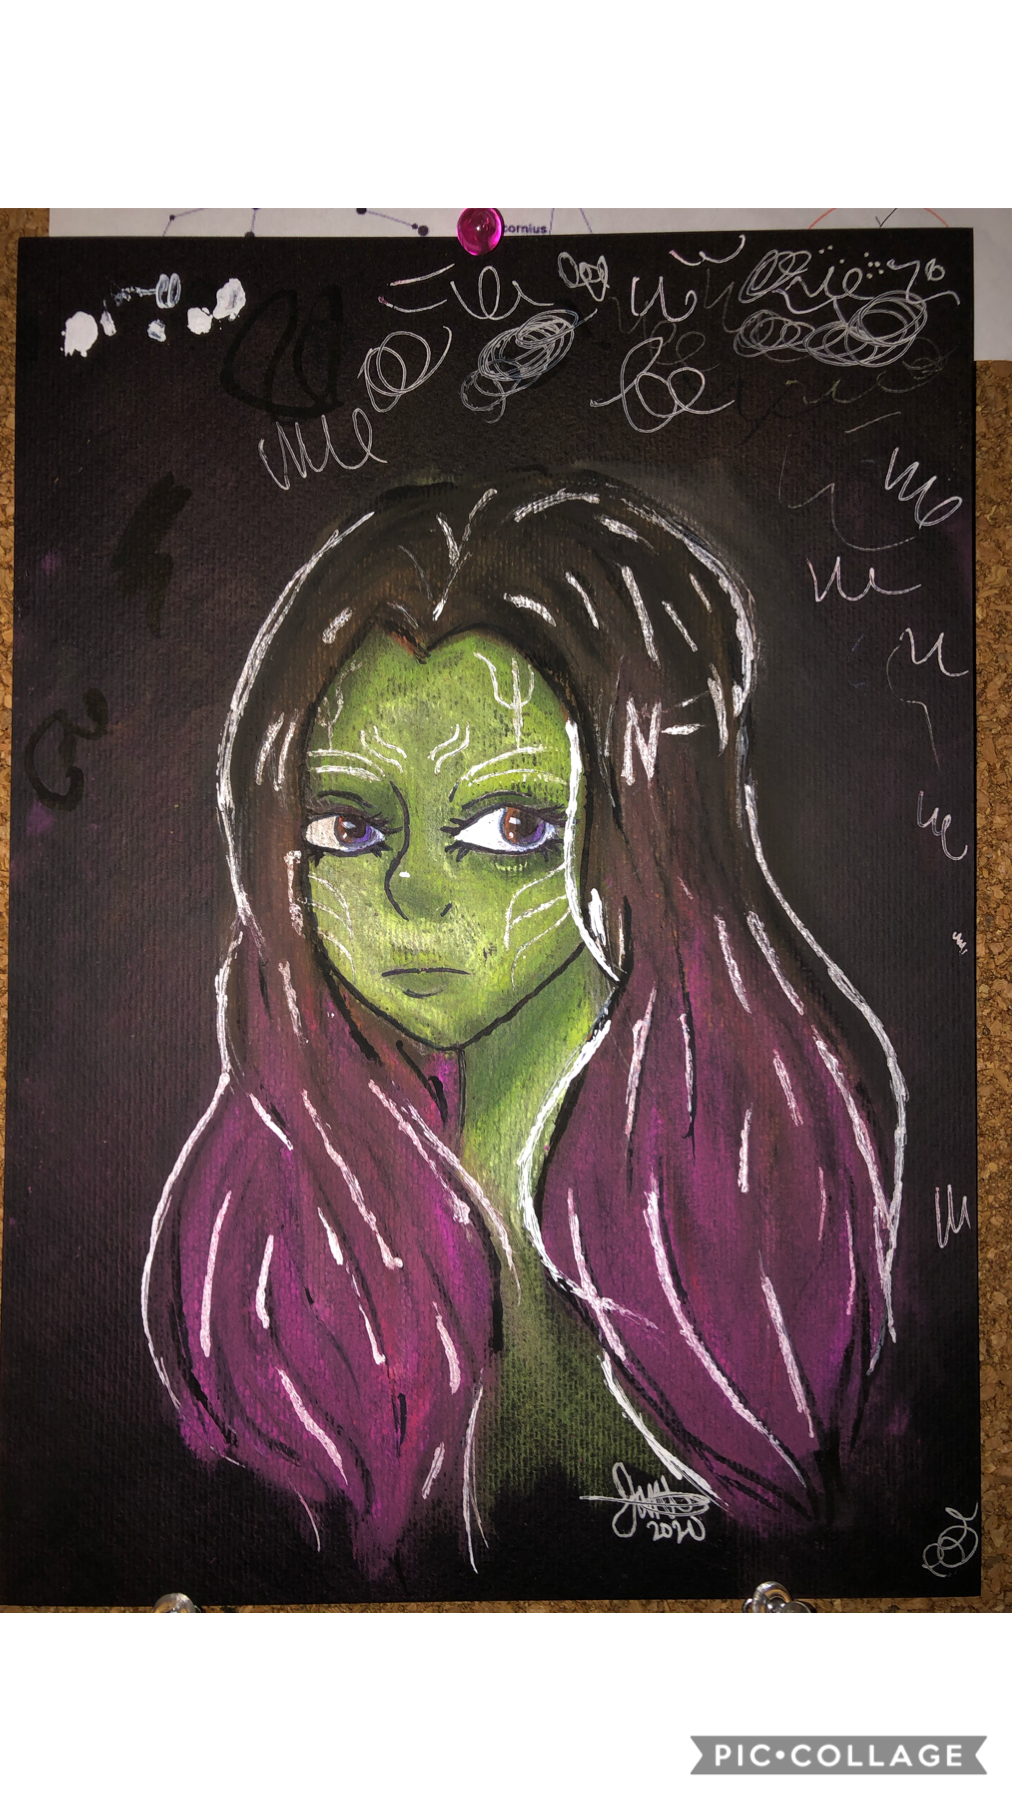 Chalk pastel drawing thing of Gamora from Guardians of the Galaxy. :) idk how much I actually like this. And chalk pastels are so fxckīng messy bro. Like seriously 😂